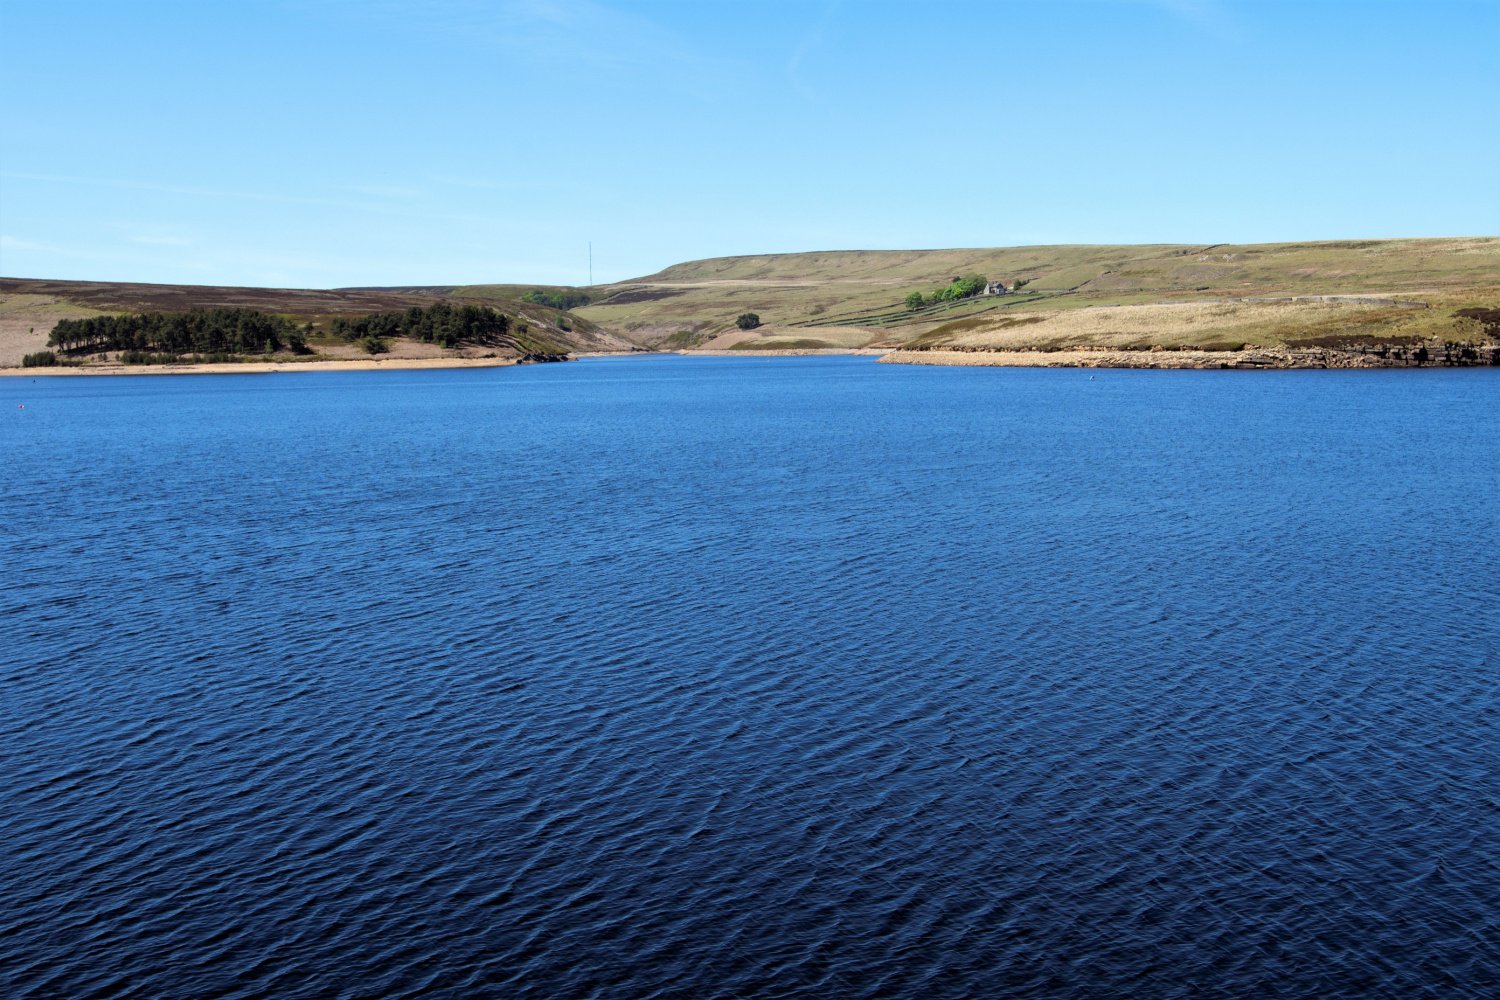 Image name winscar reservoir sheffield south yorkshire the 2 image from the post Walk: Winscar Reservoir in Yorkshire.com.